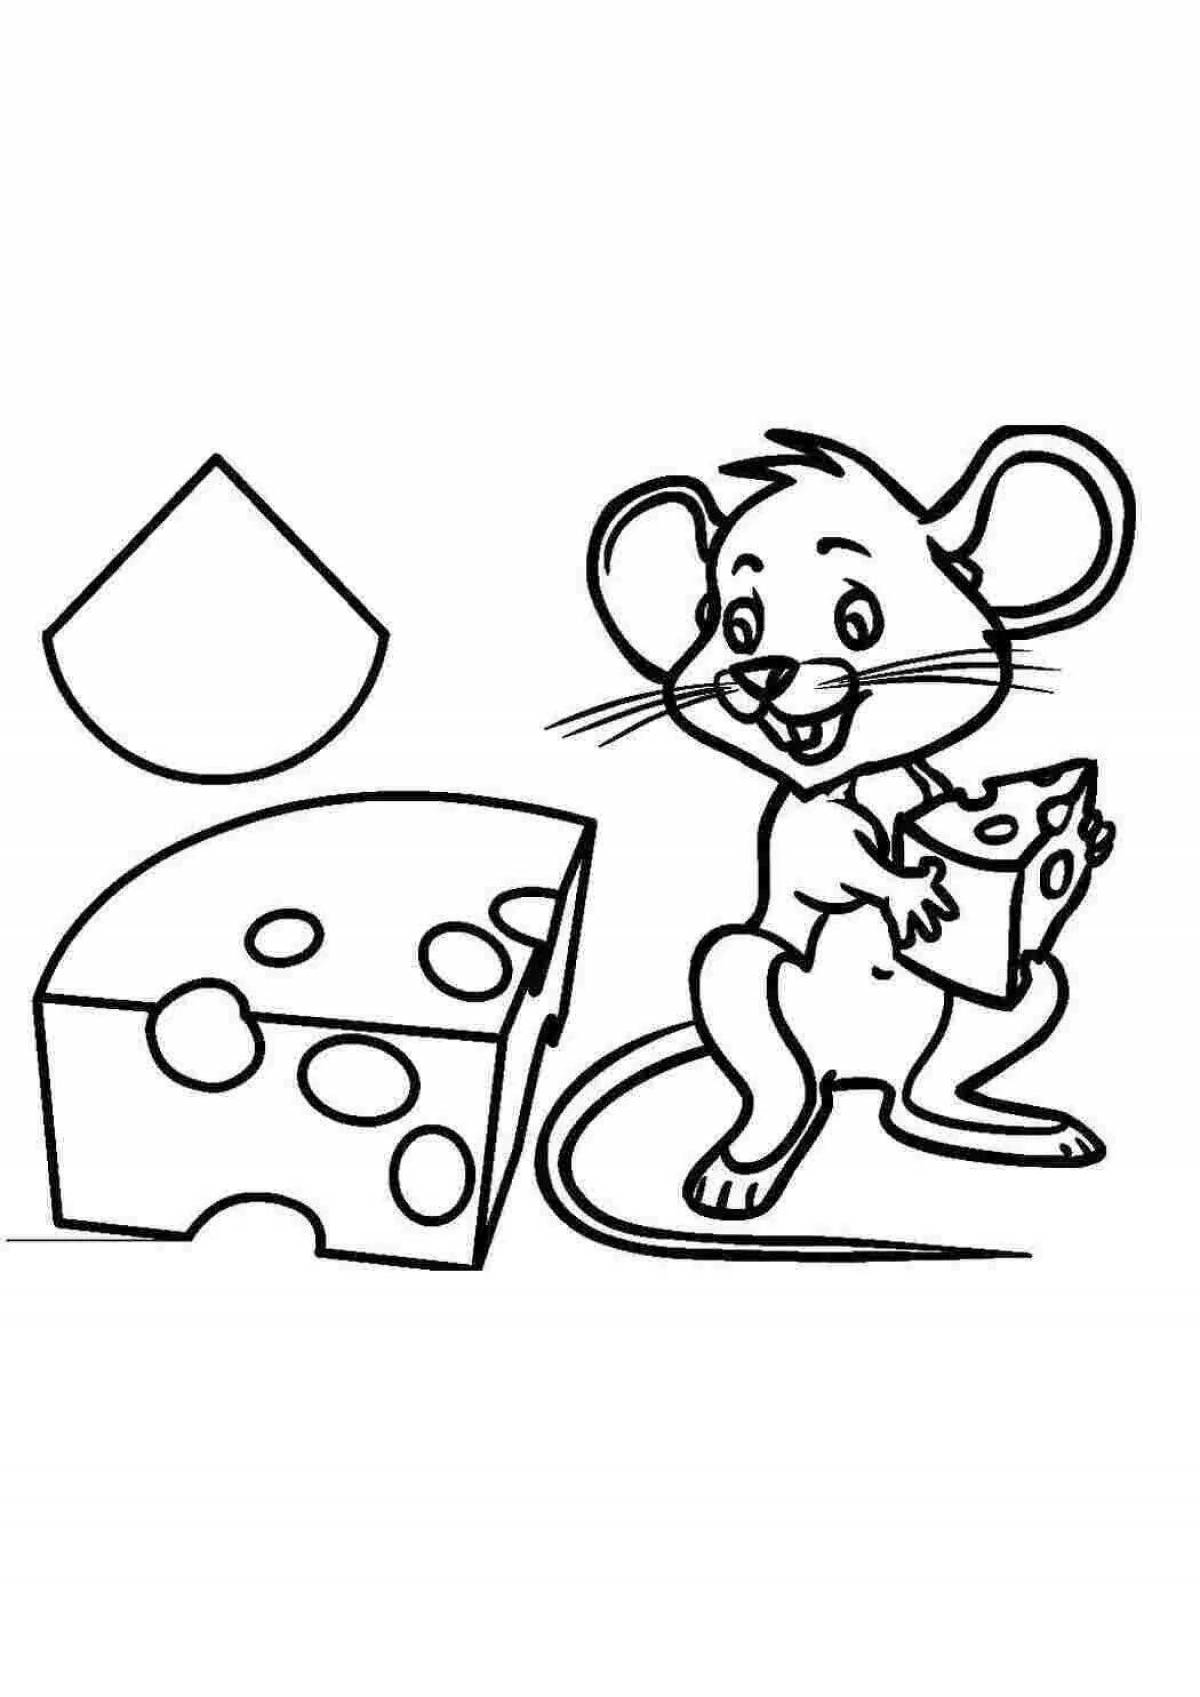 Colorful coloring mouse for children 4-5 years old